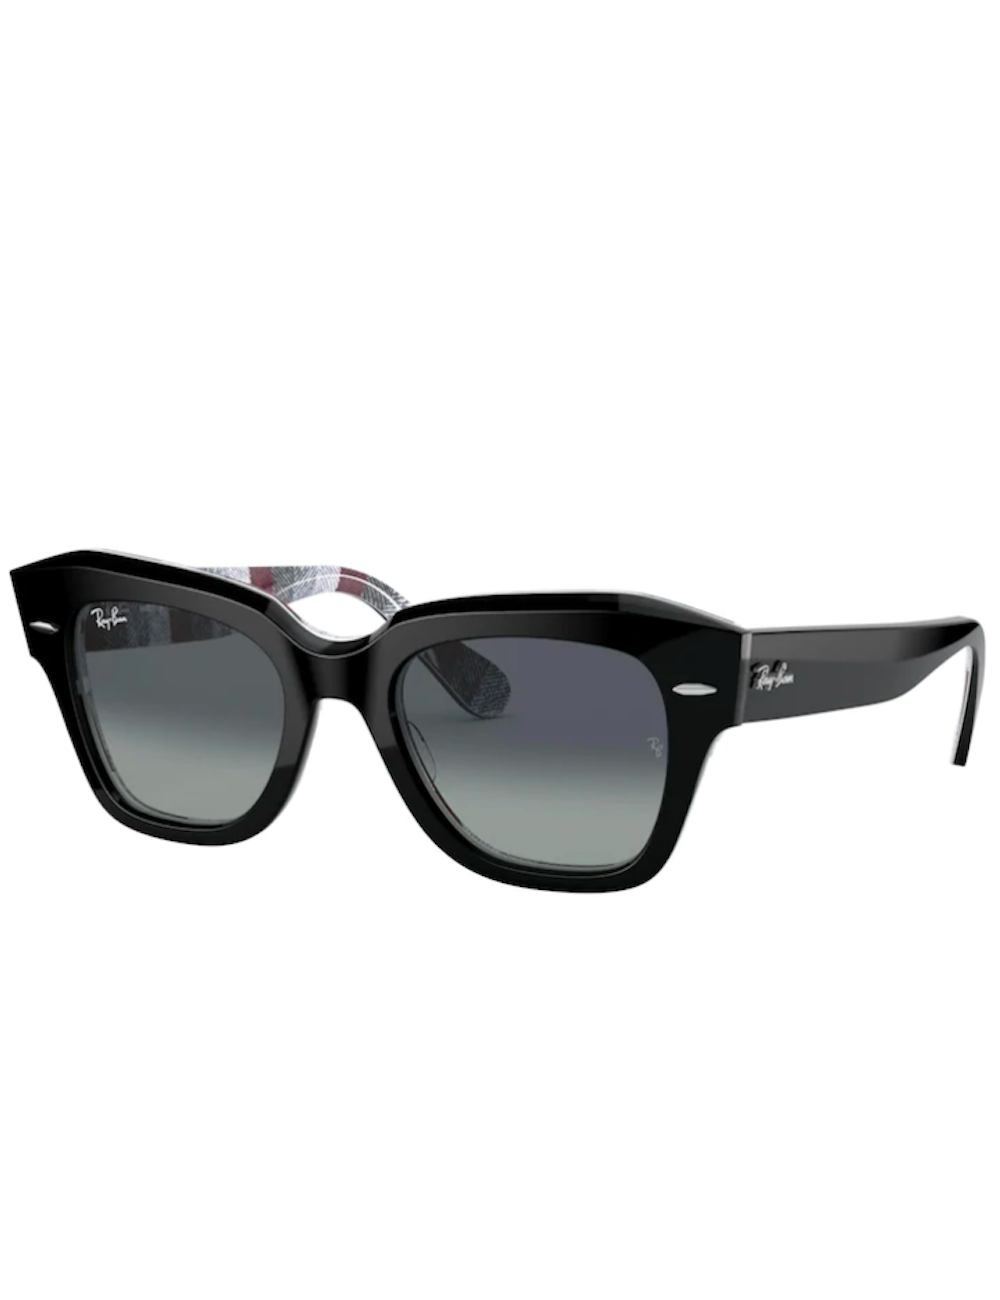 Ray Ban State Street RB2186 13183A square sunglasses 